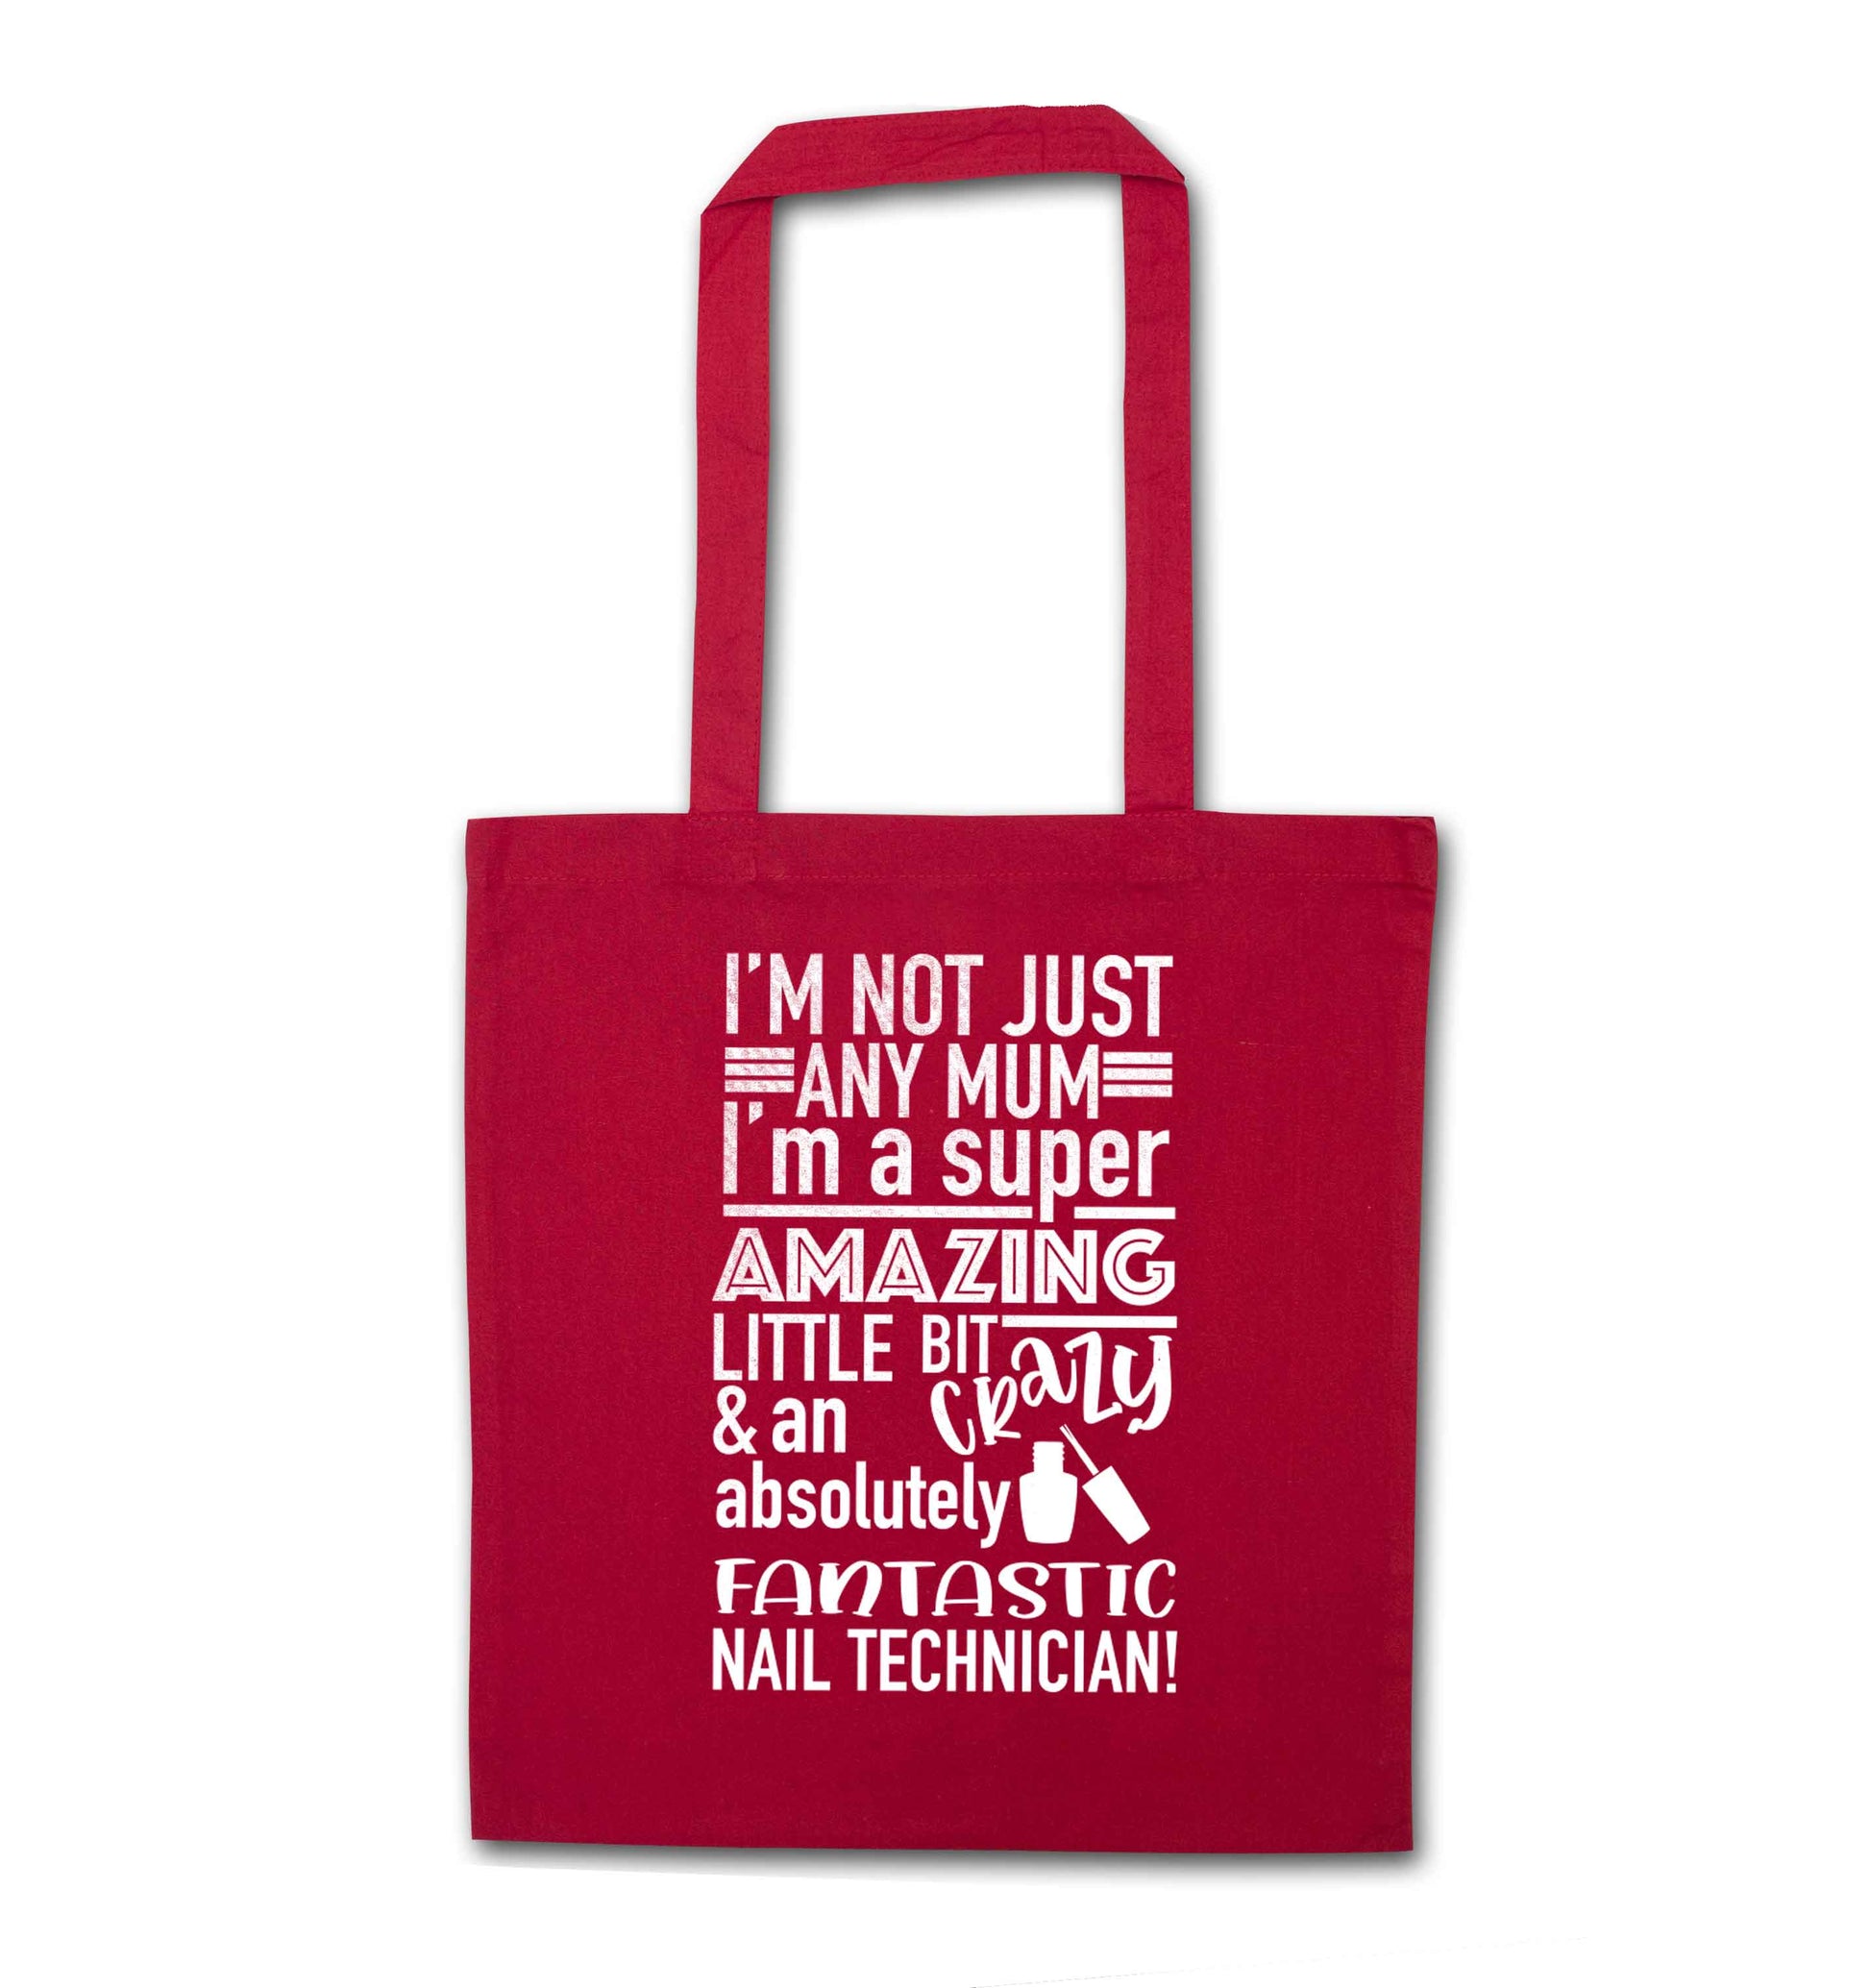 I'm not just any mum I'm a super amazing little bit crazy and an absolutely fantastic nail technician! red tote bag